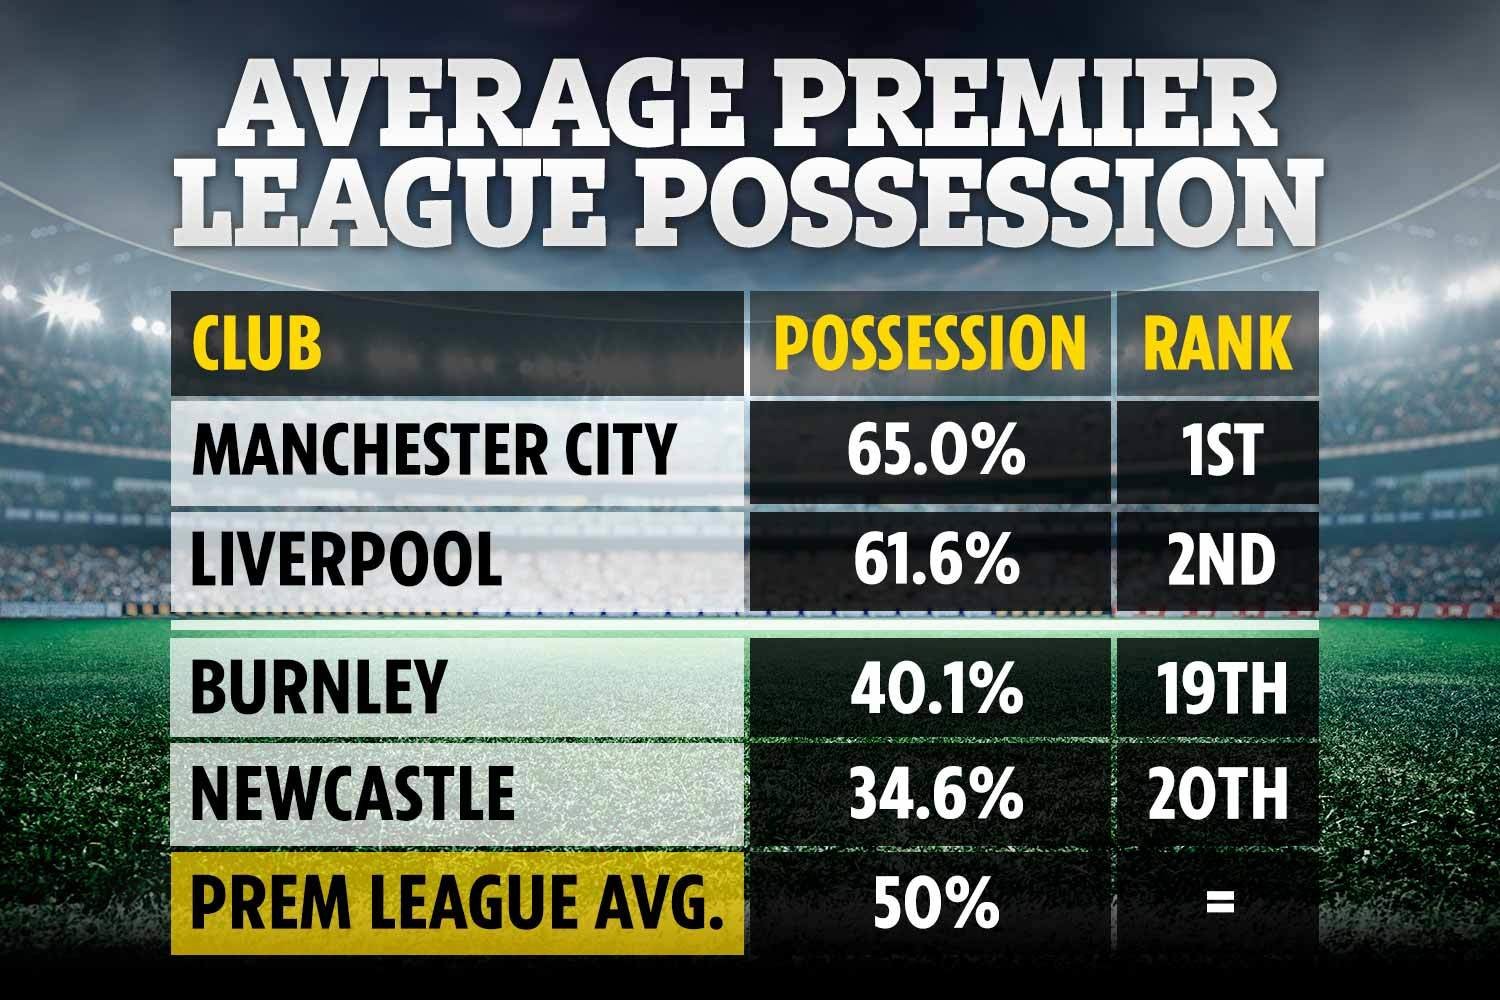 Newcastle have enjoyed the lowest amount of possession of all the Premier League sides this season